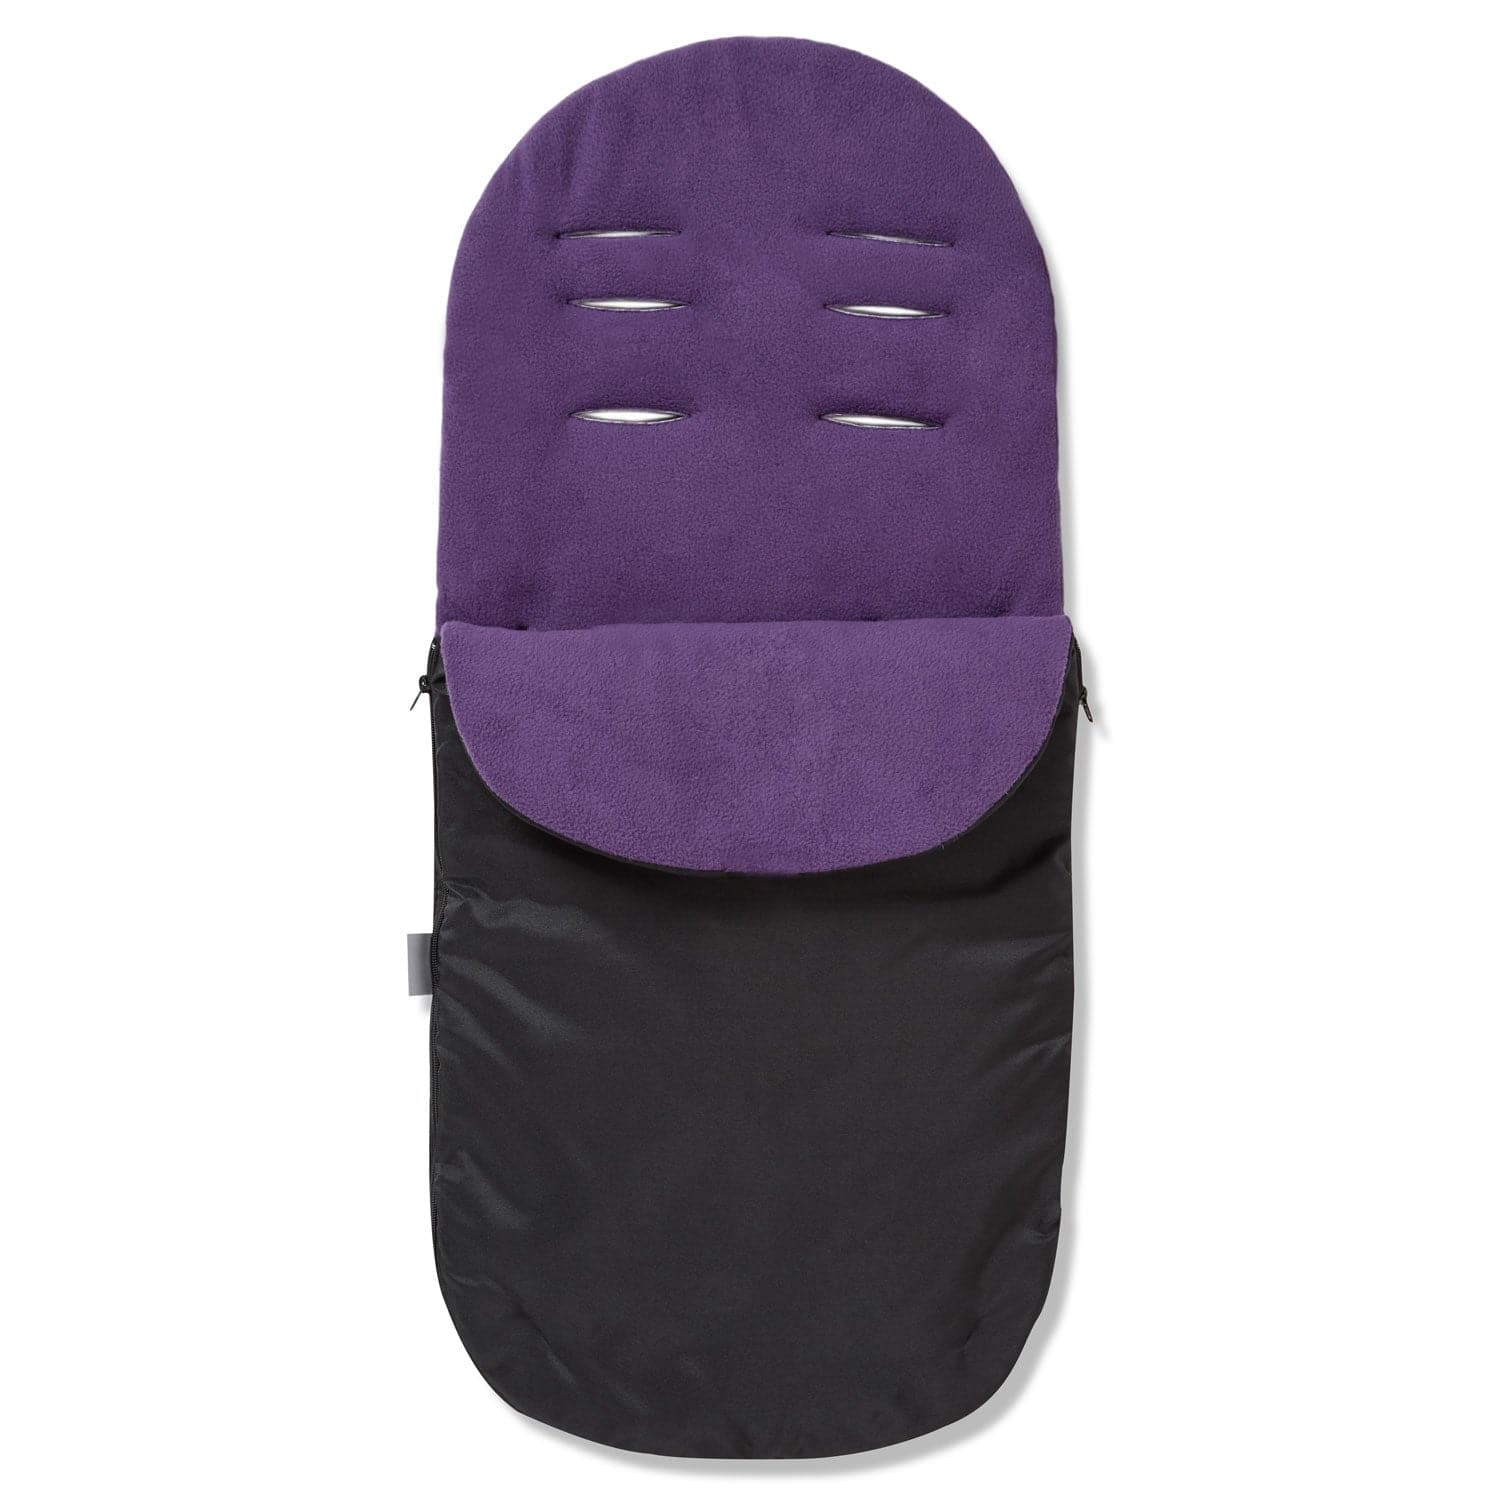 Footmuff / Cosy Toes Compatible with Valco - Purple / Fits All Models | For Your Little One